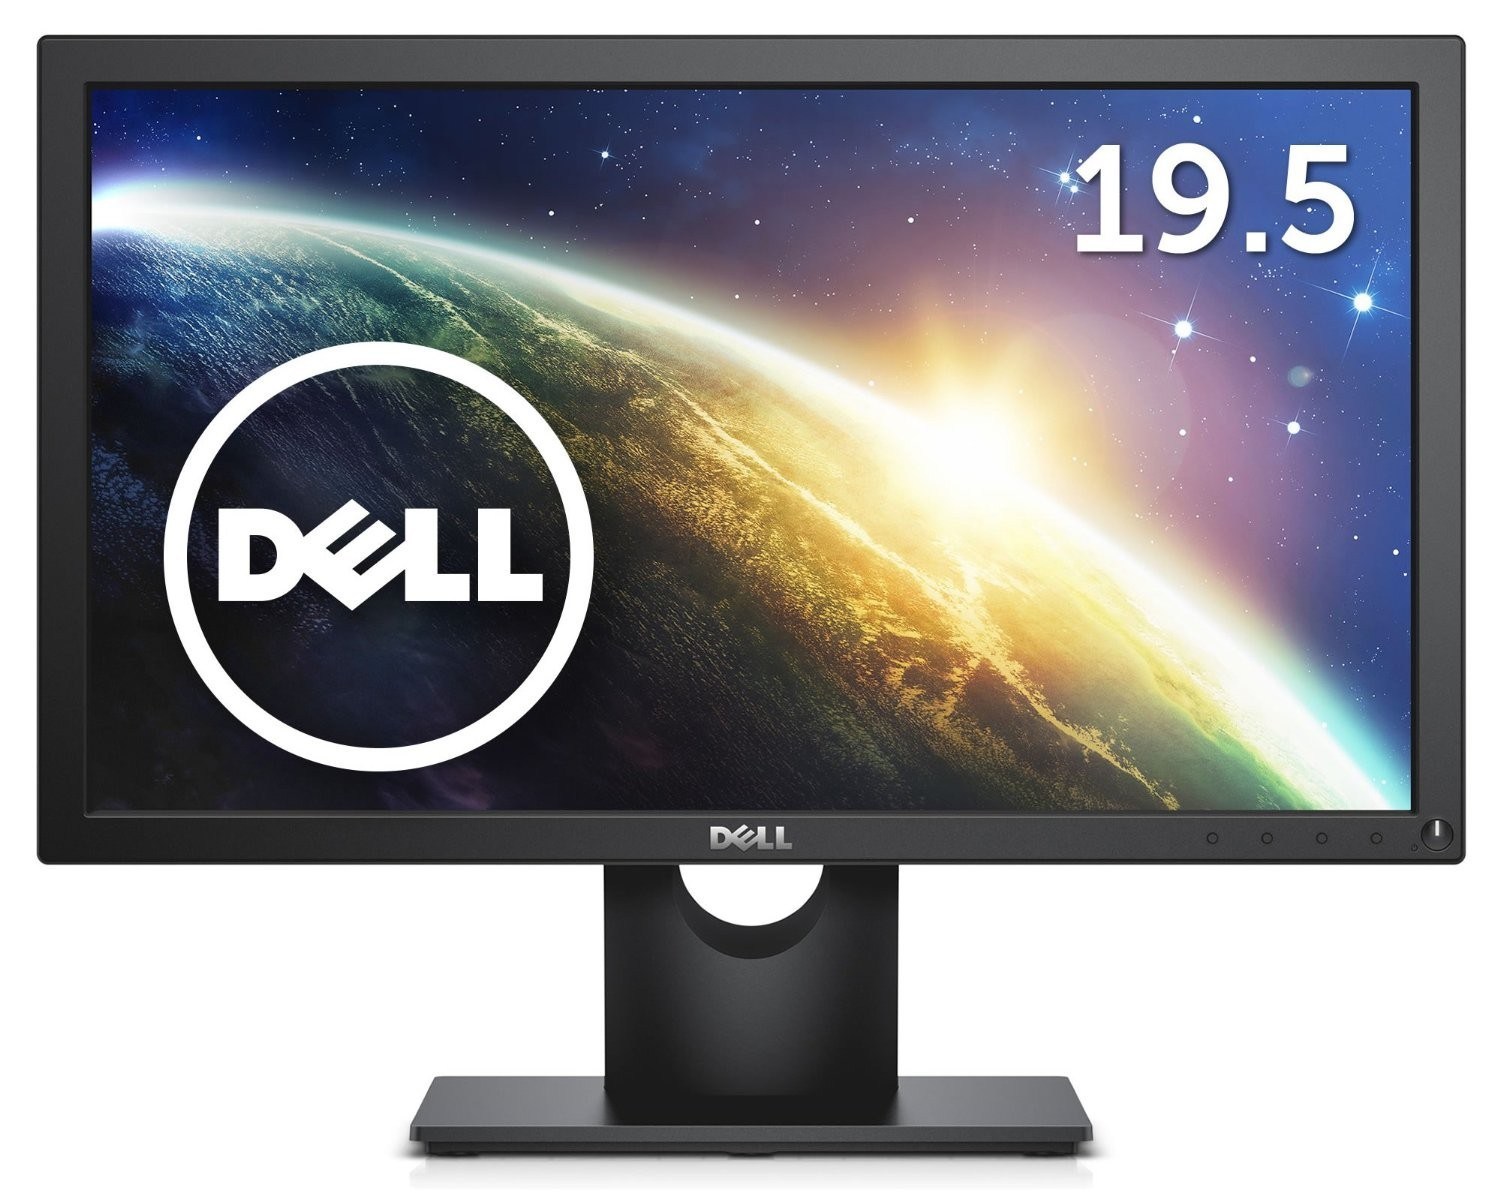 19078 Mn hnh my tnh Dell E2016H 19.5 inch Wide LED